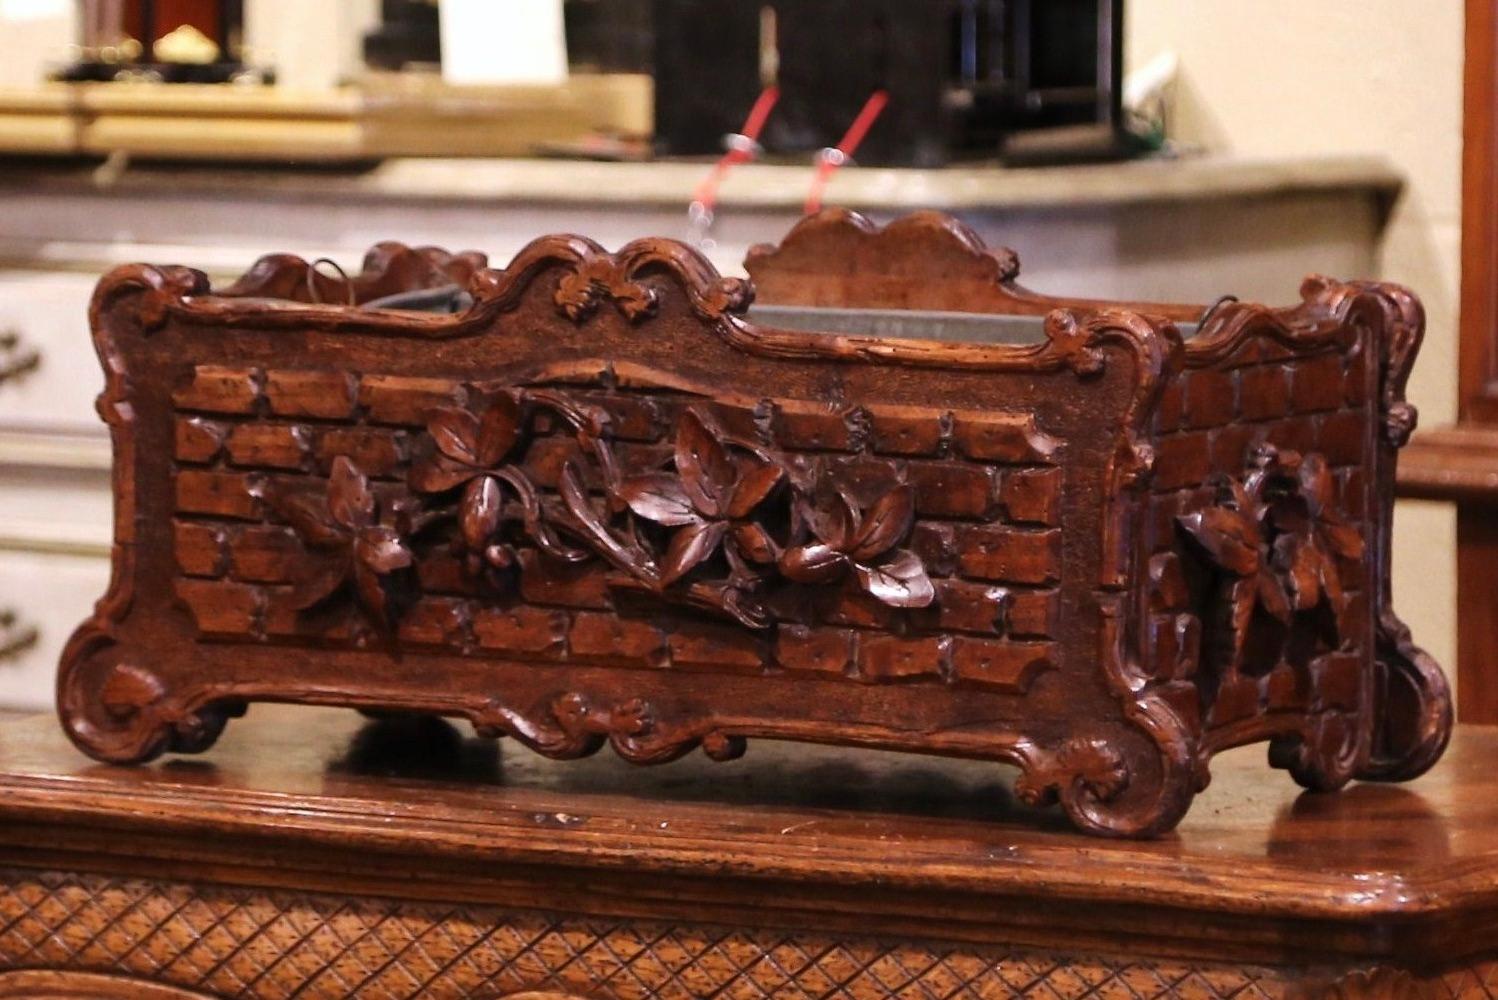 This elegant antique planter was crafted in France, circa 1870. Rectangular in shape with scrolled decor and scalloped edge, the detailed planter is decorated with Fine hand carved floral and leaf motifs on all four sides. The large cachepot with